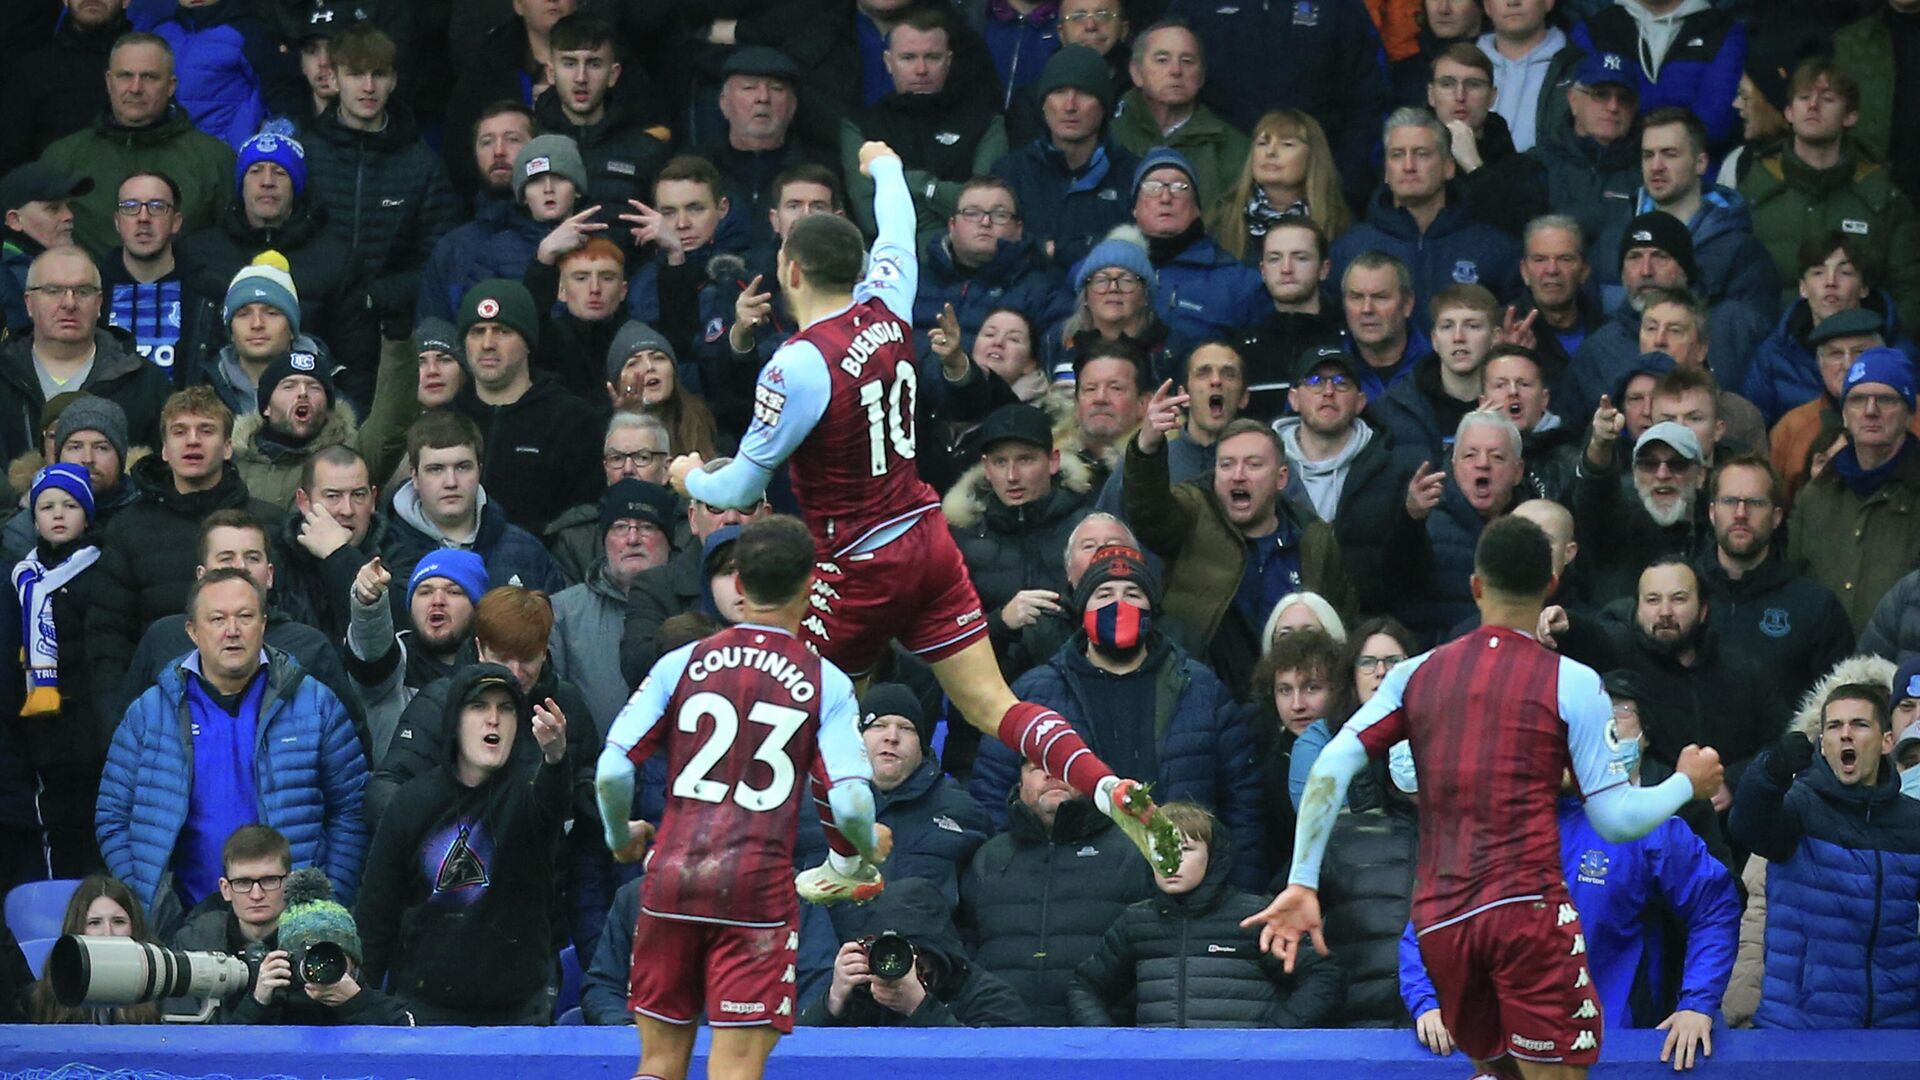 Aston Villa's Argentinian midfielder Emiliano Buendia (C) celebrates scoring the opening goal in front of the Everton supporters during the English Premier League football match between Everton and Aston Villa at Goodison Park in Liverpool, north west England on January 22, 2022. (Photo by Lindsey Parnaby / AFP) / RESTRICTED TO EDITORIAL USE. No use with unauthorized audio, video, data, fixture lists, club/league logos or 'live' services. Online in-match use limited to 120 images. An additional 40 images may be used in extra time. No video emulation. Social media in-match use limited to 120 images. An additional 40 images may be used in extra time. No use in betting publications, games or single club/league/player publications. /  - РИА Новости, 1920, 22.01.2022